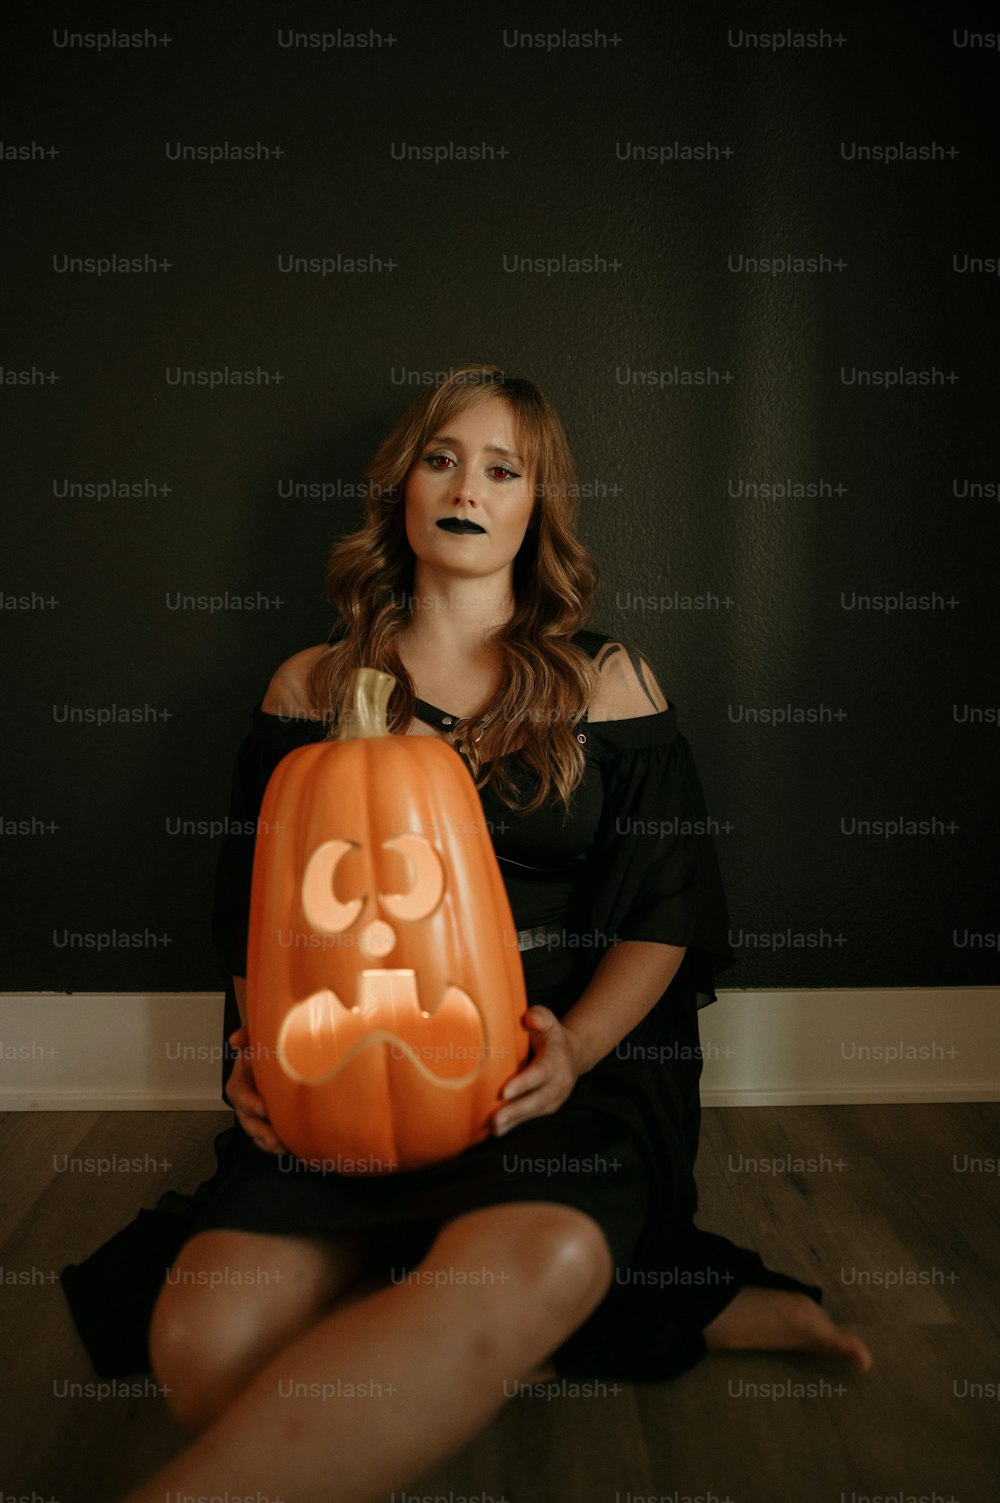 a woman sitting on the floor holding a carved pumpkin